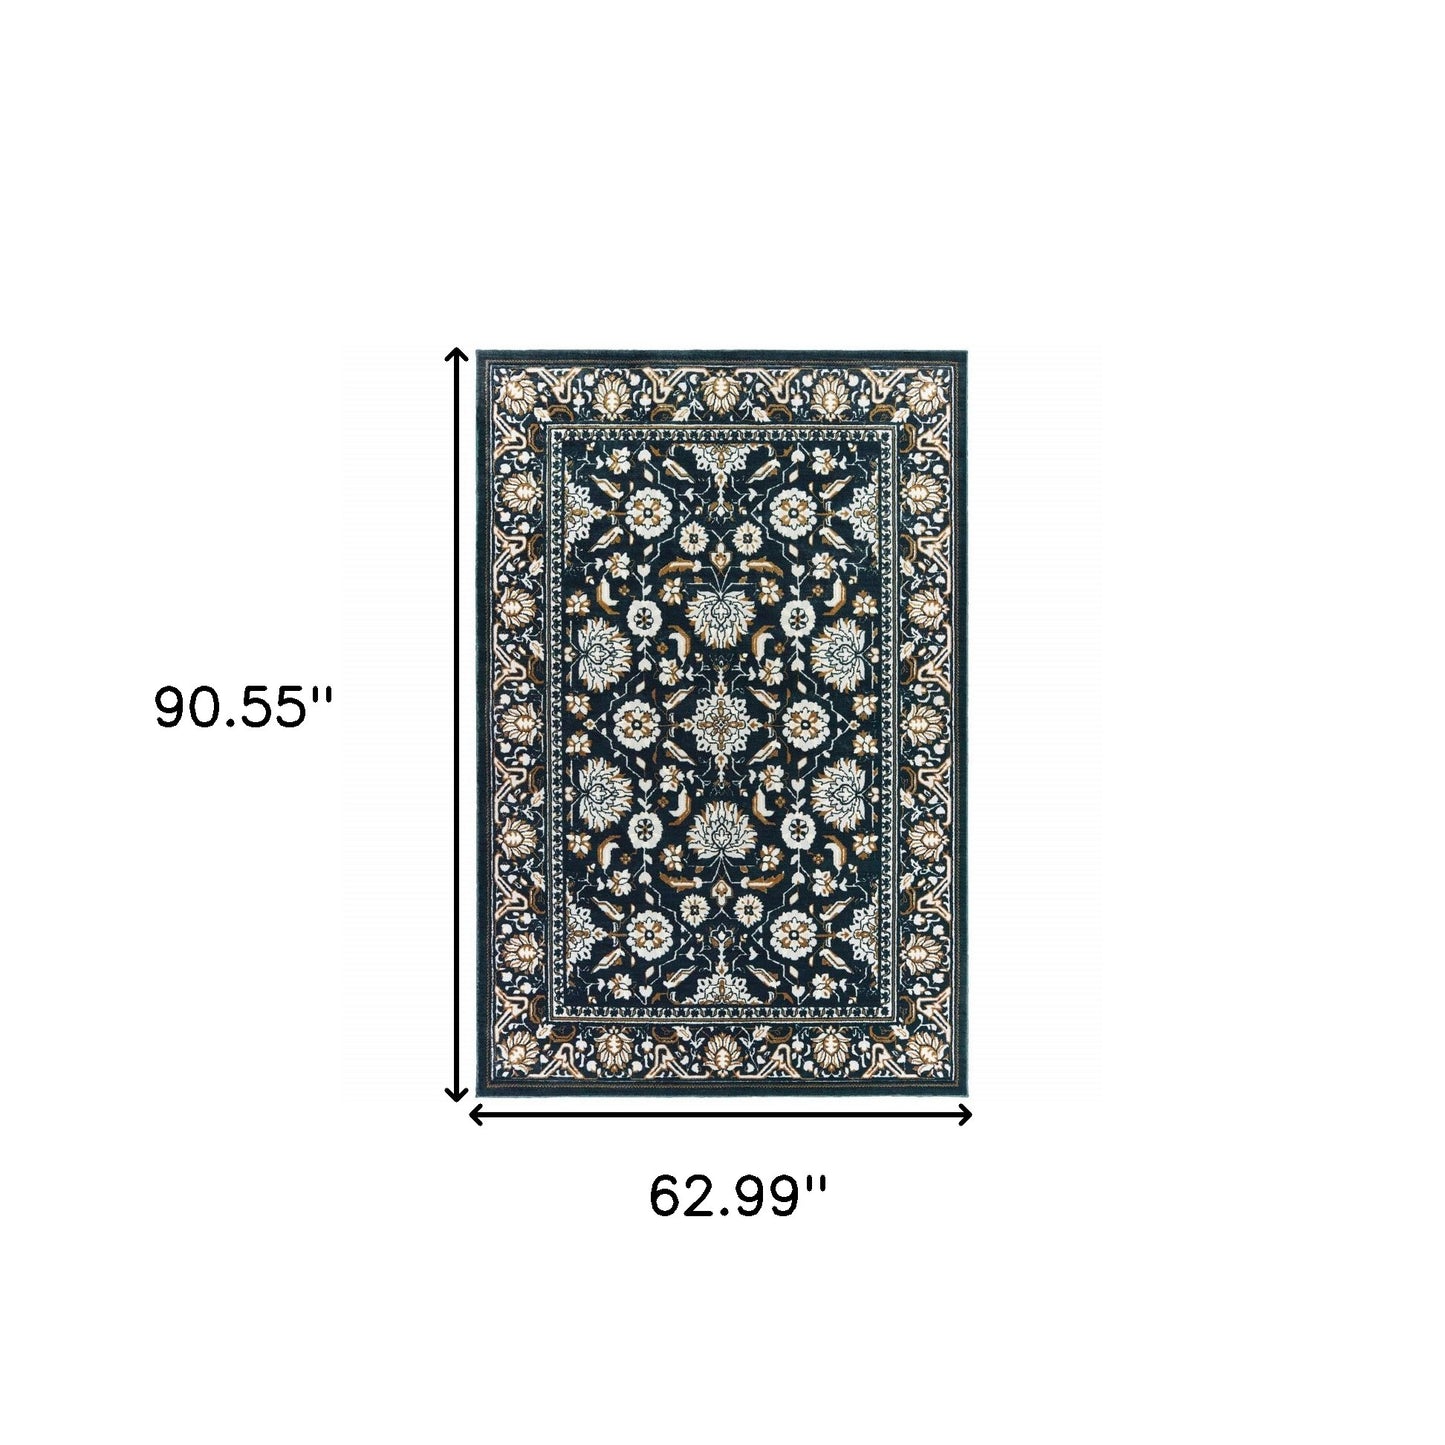 5' X 8' Navy Caramel And Ivory Oriental Power Loom Stain Resistant Area Rug